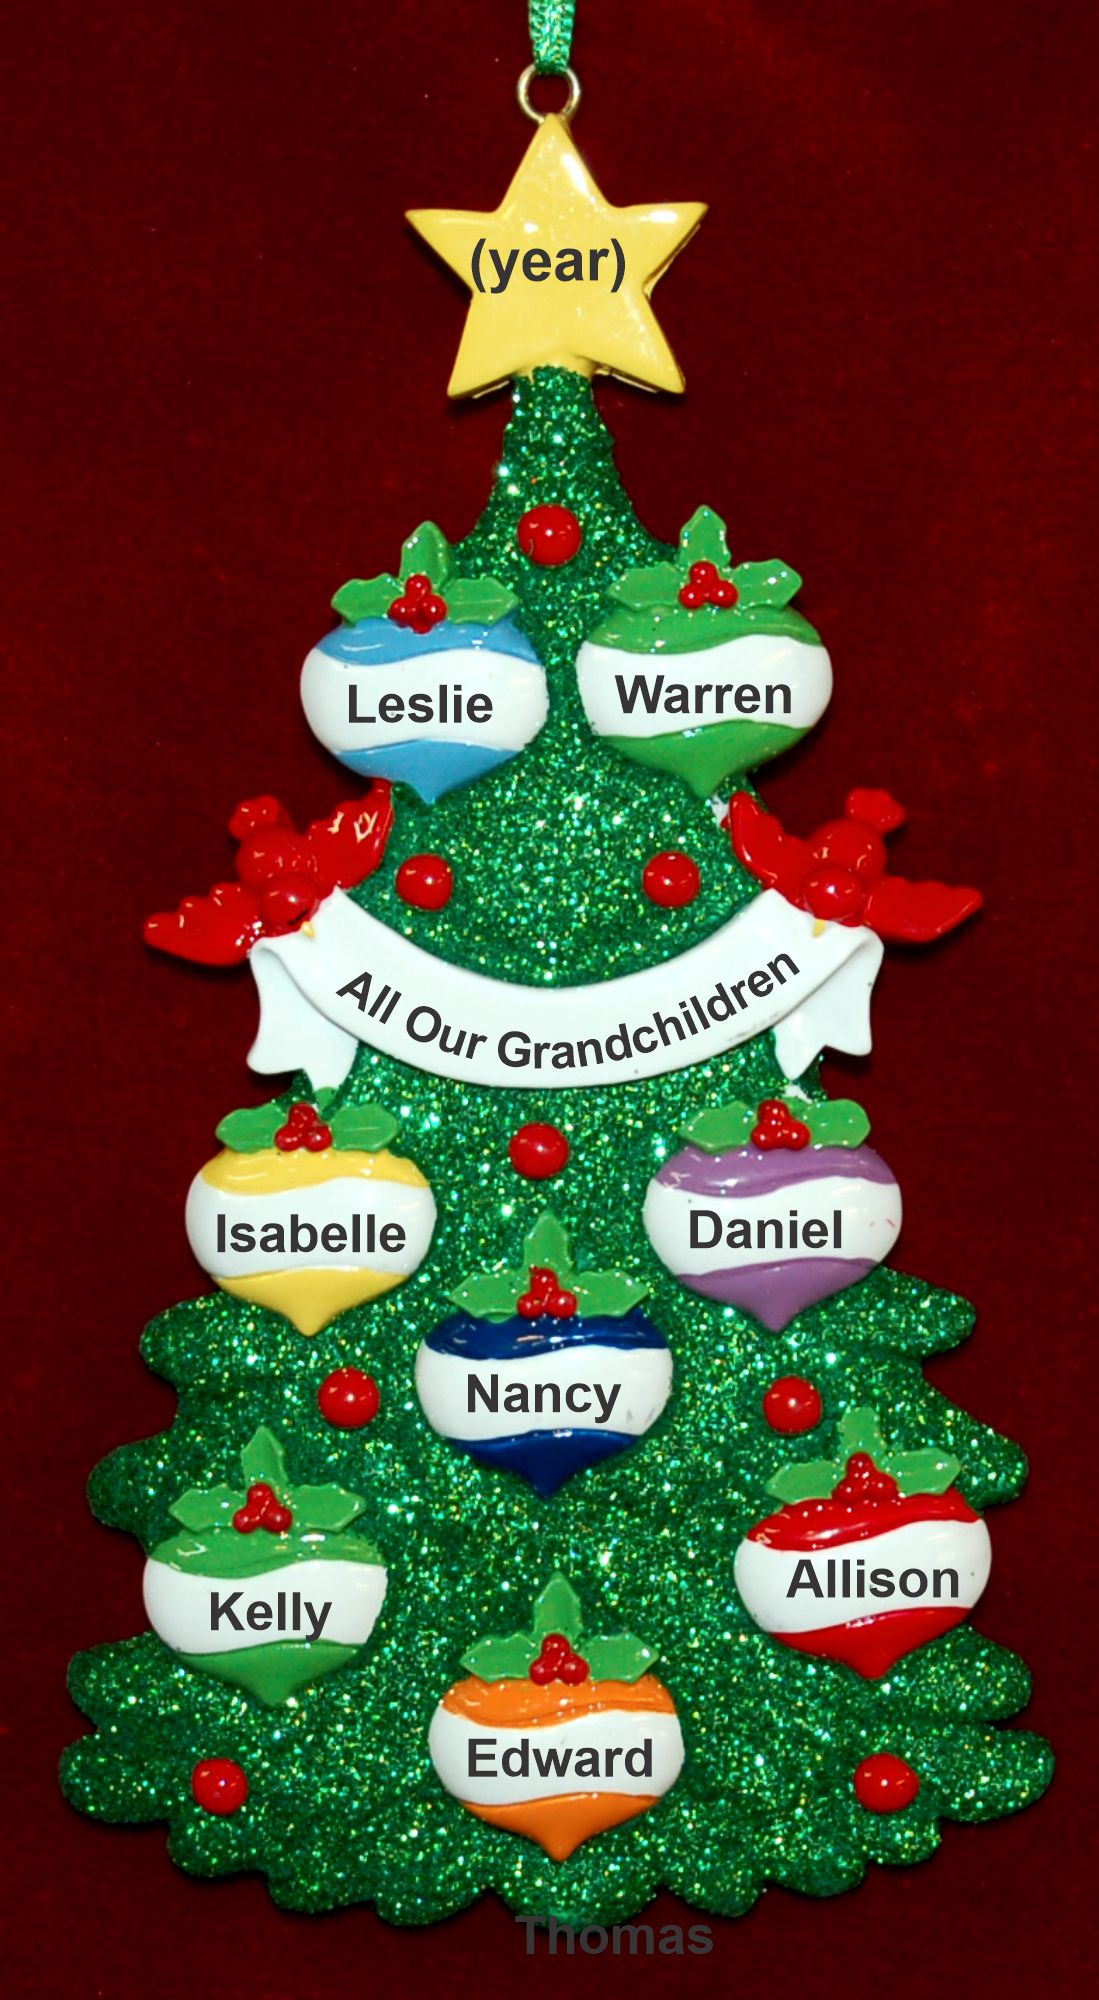 Grandkids Christmas Ornament Xmas Tree for 8 Grandkids Personalized by RussellRhodes.com